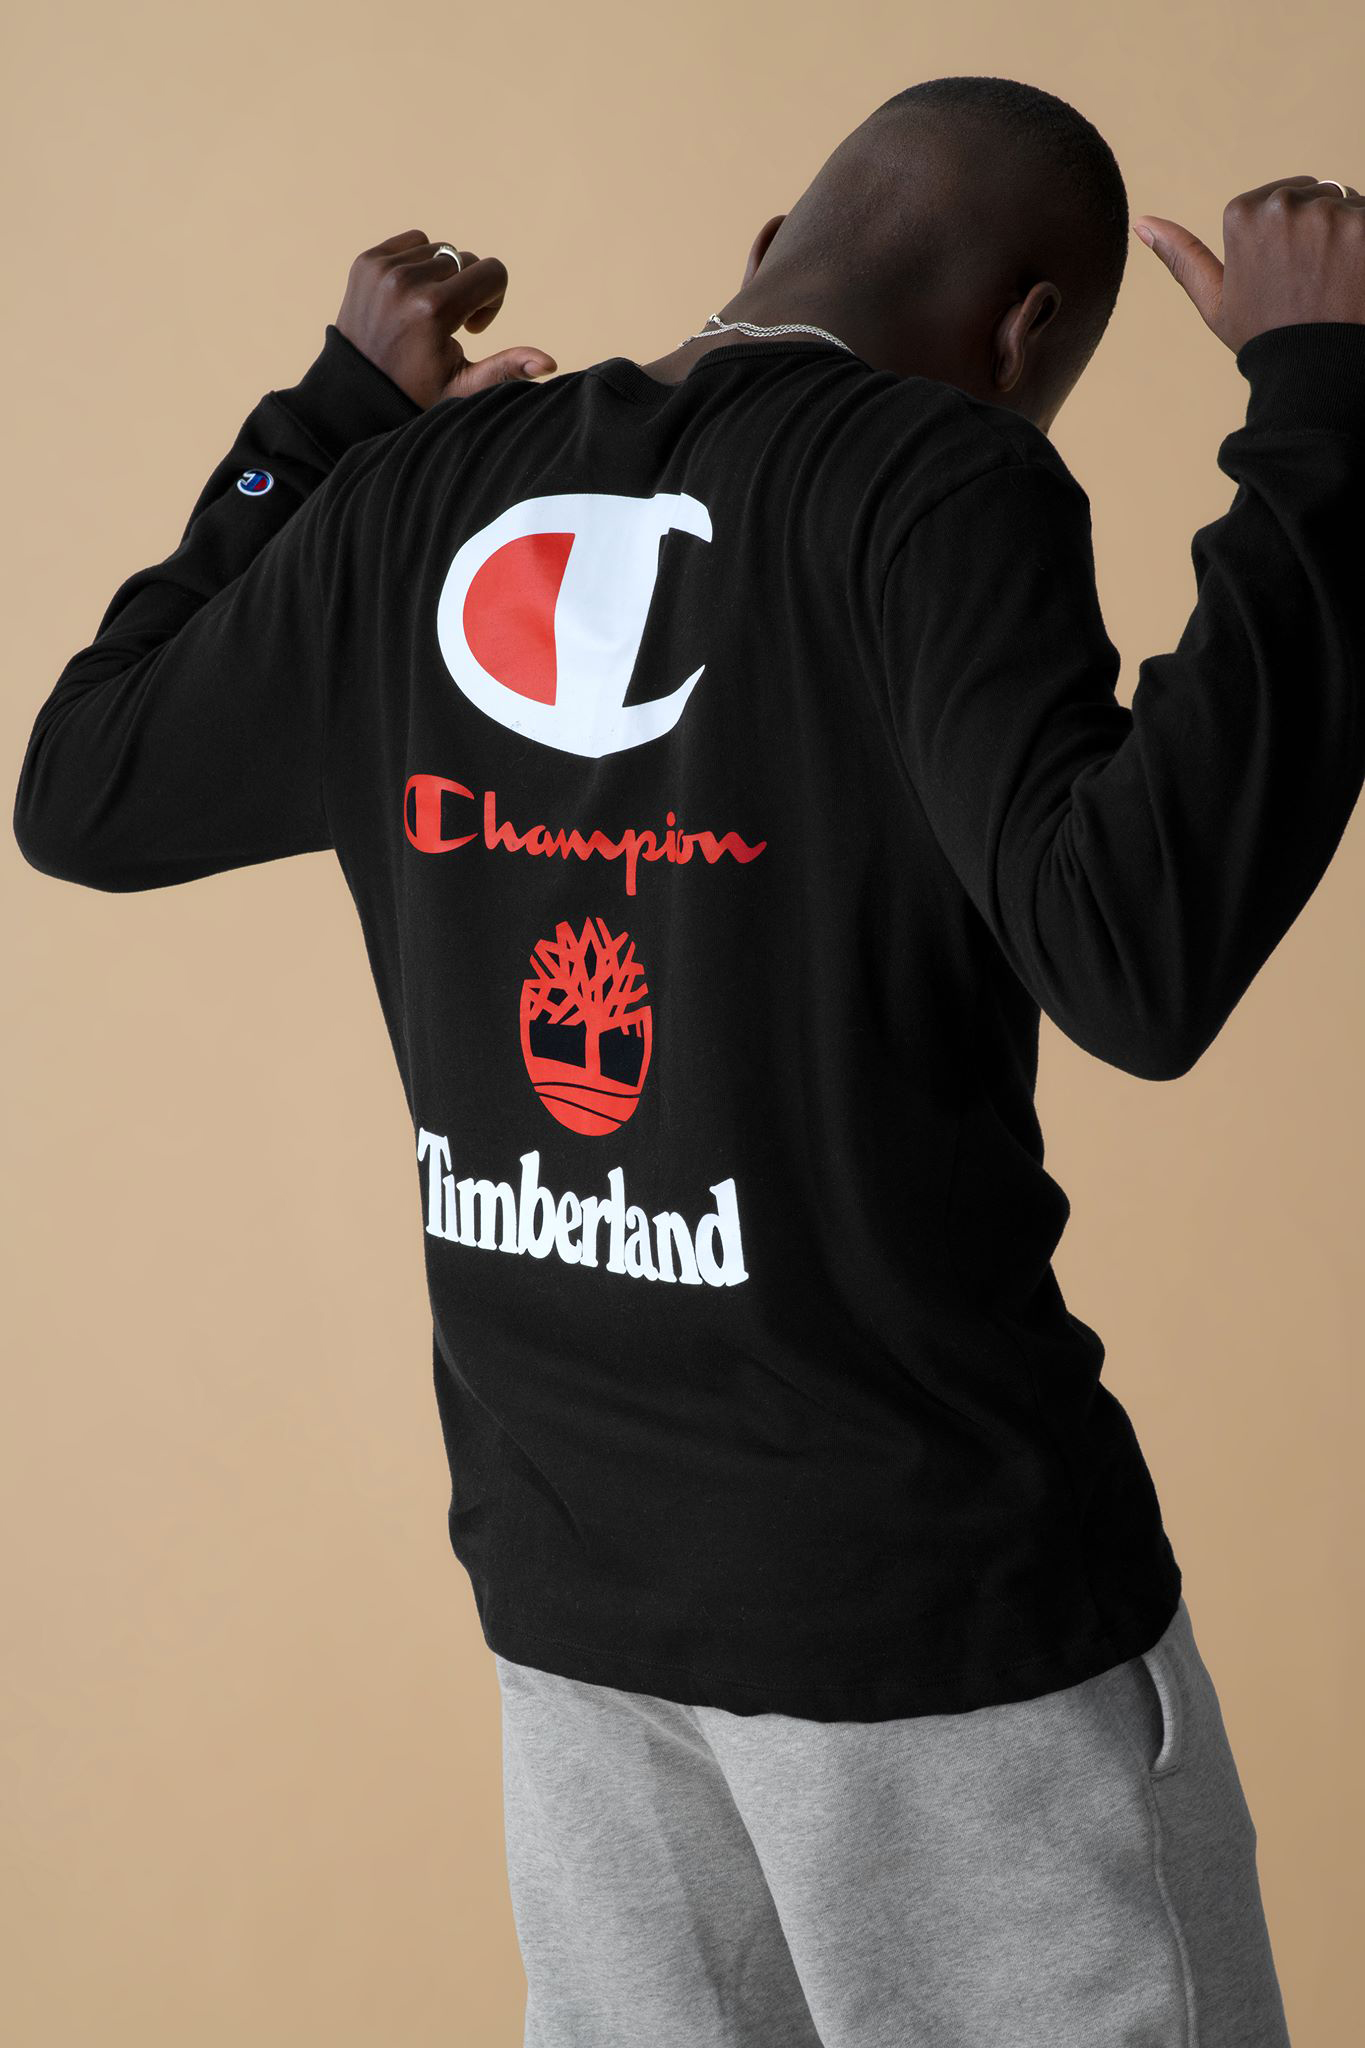 Champion Timberland Boots and Tee 